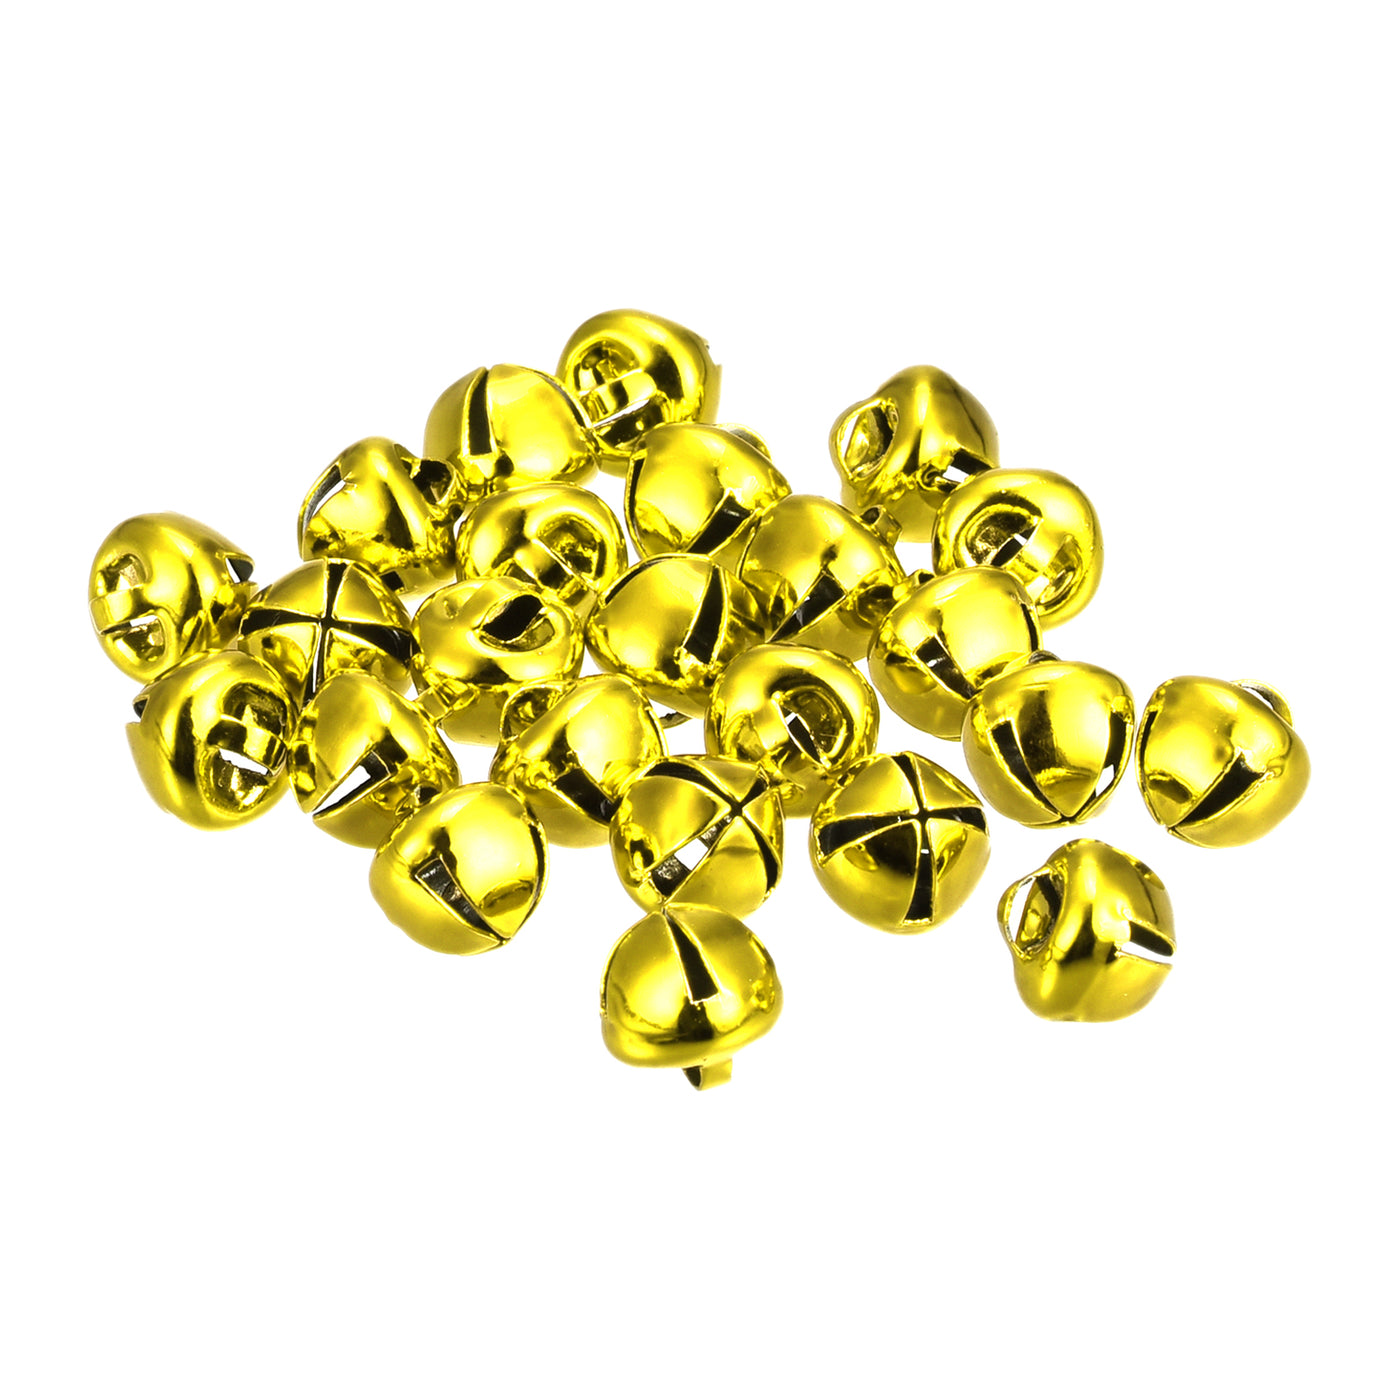 uxcell Uxcell Jingle Bells, 8mm 80pcs Small Bells for Crafts DIY Christmas, Gold Tone